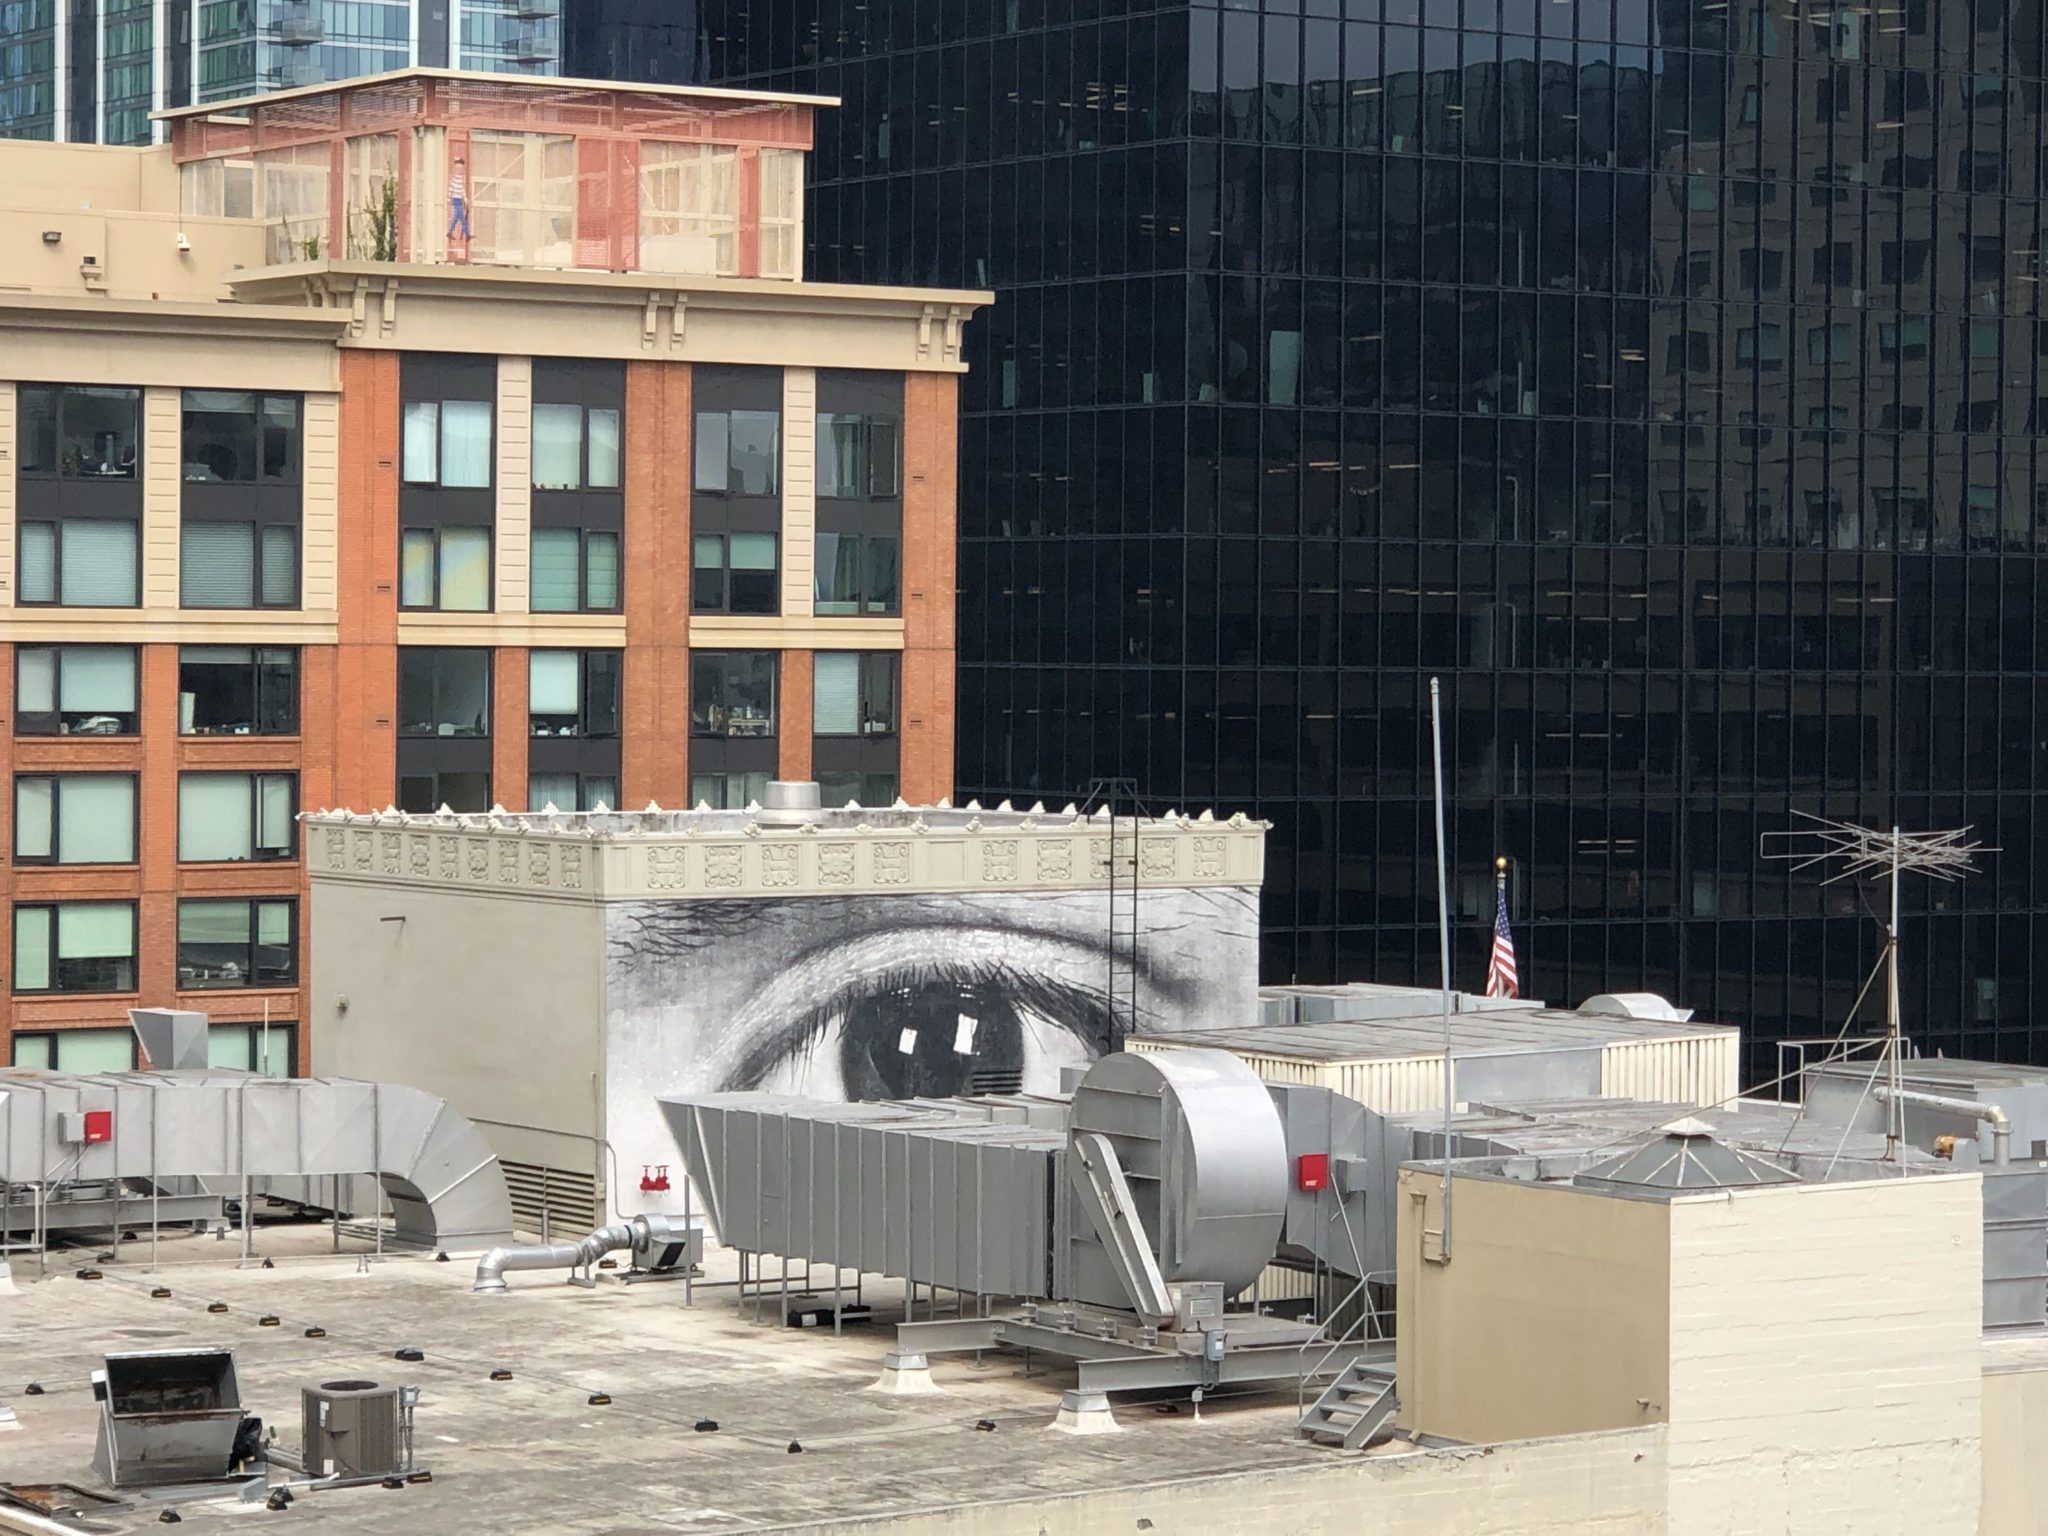 artwork by JR on academy of art rooftop